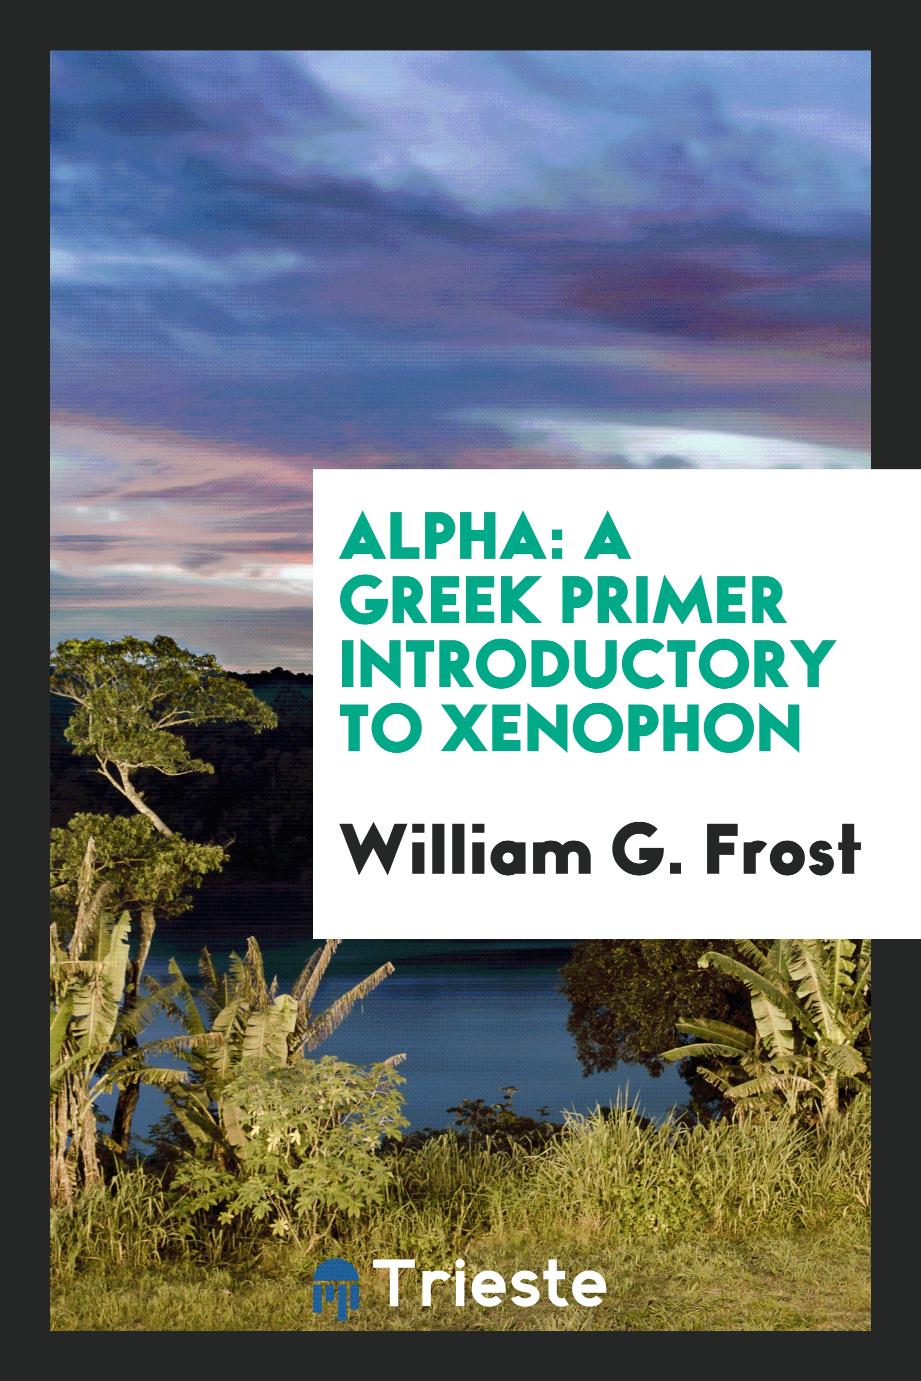 Alpha: A Greek Primer Introductory to Xenophon